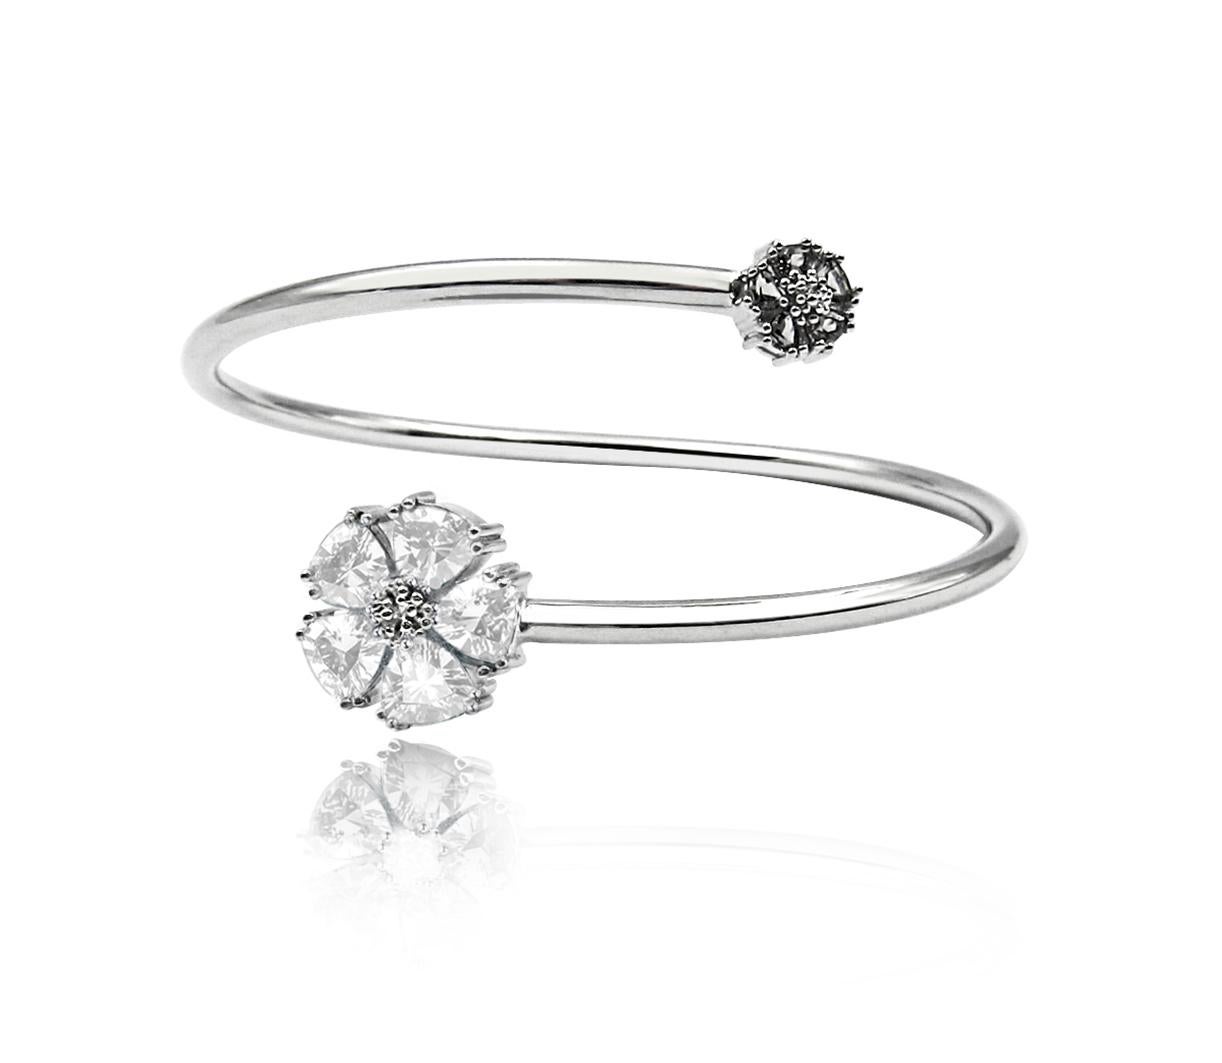 Whatever the season, take a little natural beauty with you everywhere you go. This stunningly simple, yet beautiful blossom gentile bypass bangle is your perfect complement to any style. .925 sterling silver base. Also available in 24k yellow or